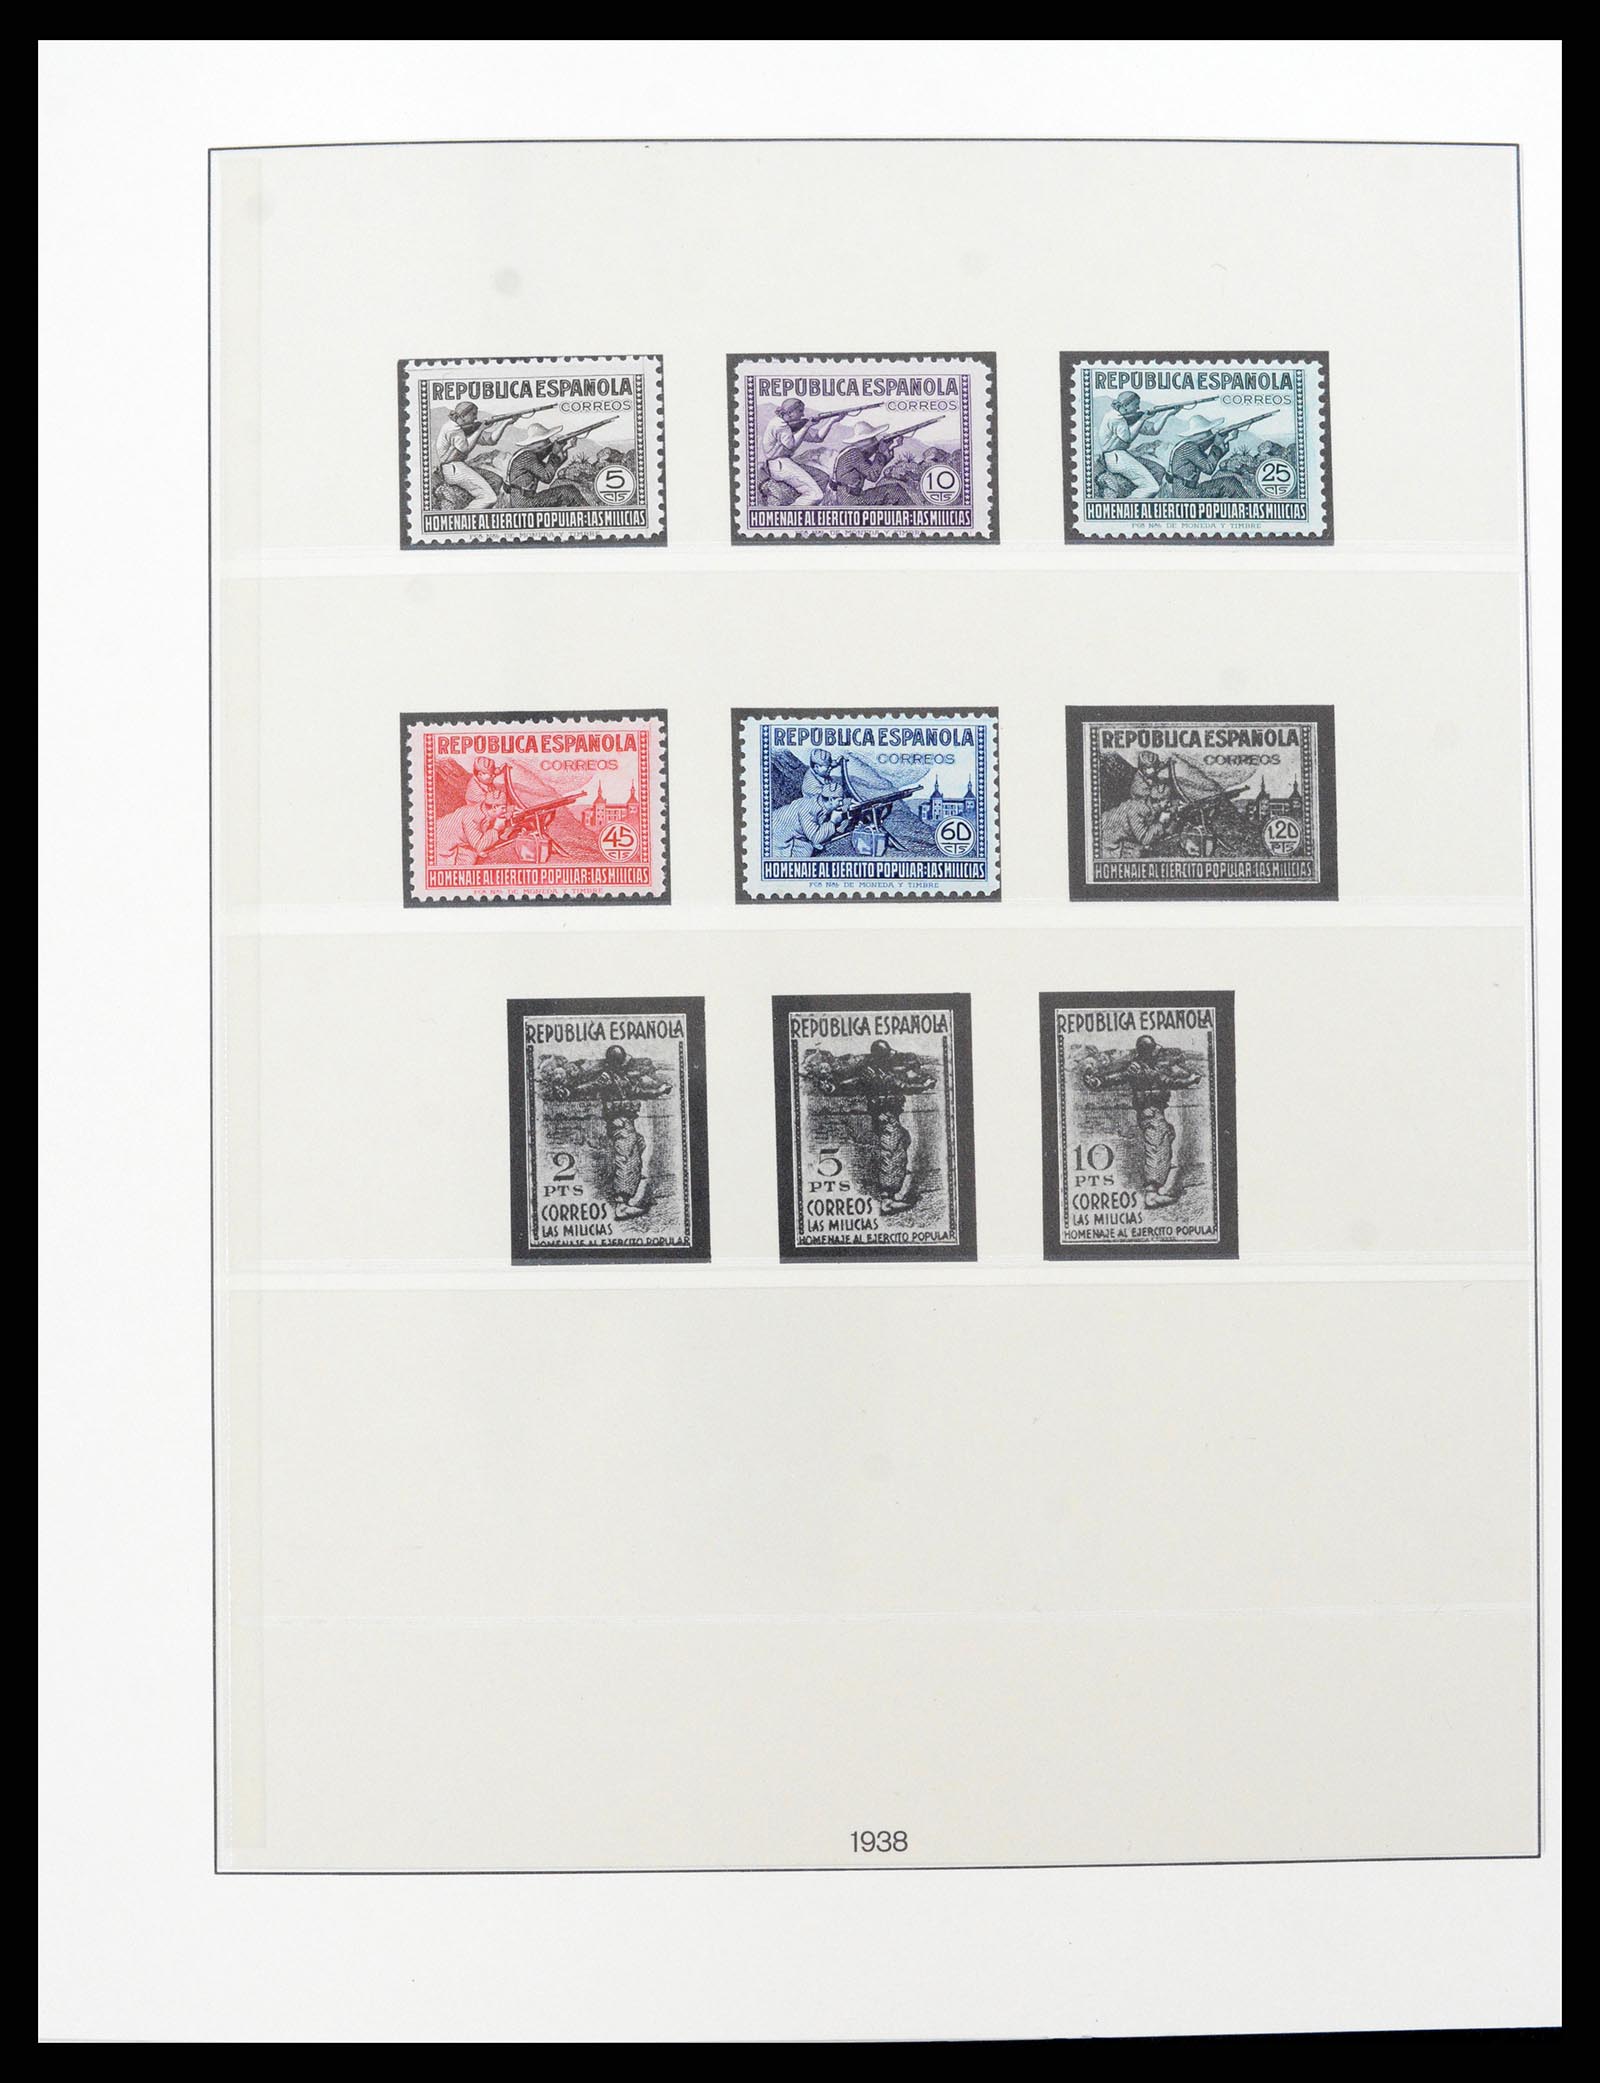 37126 091 - Stamp collection 37126 Spain and colonies 1850-1976.